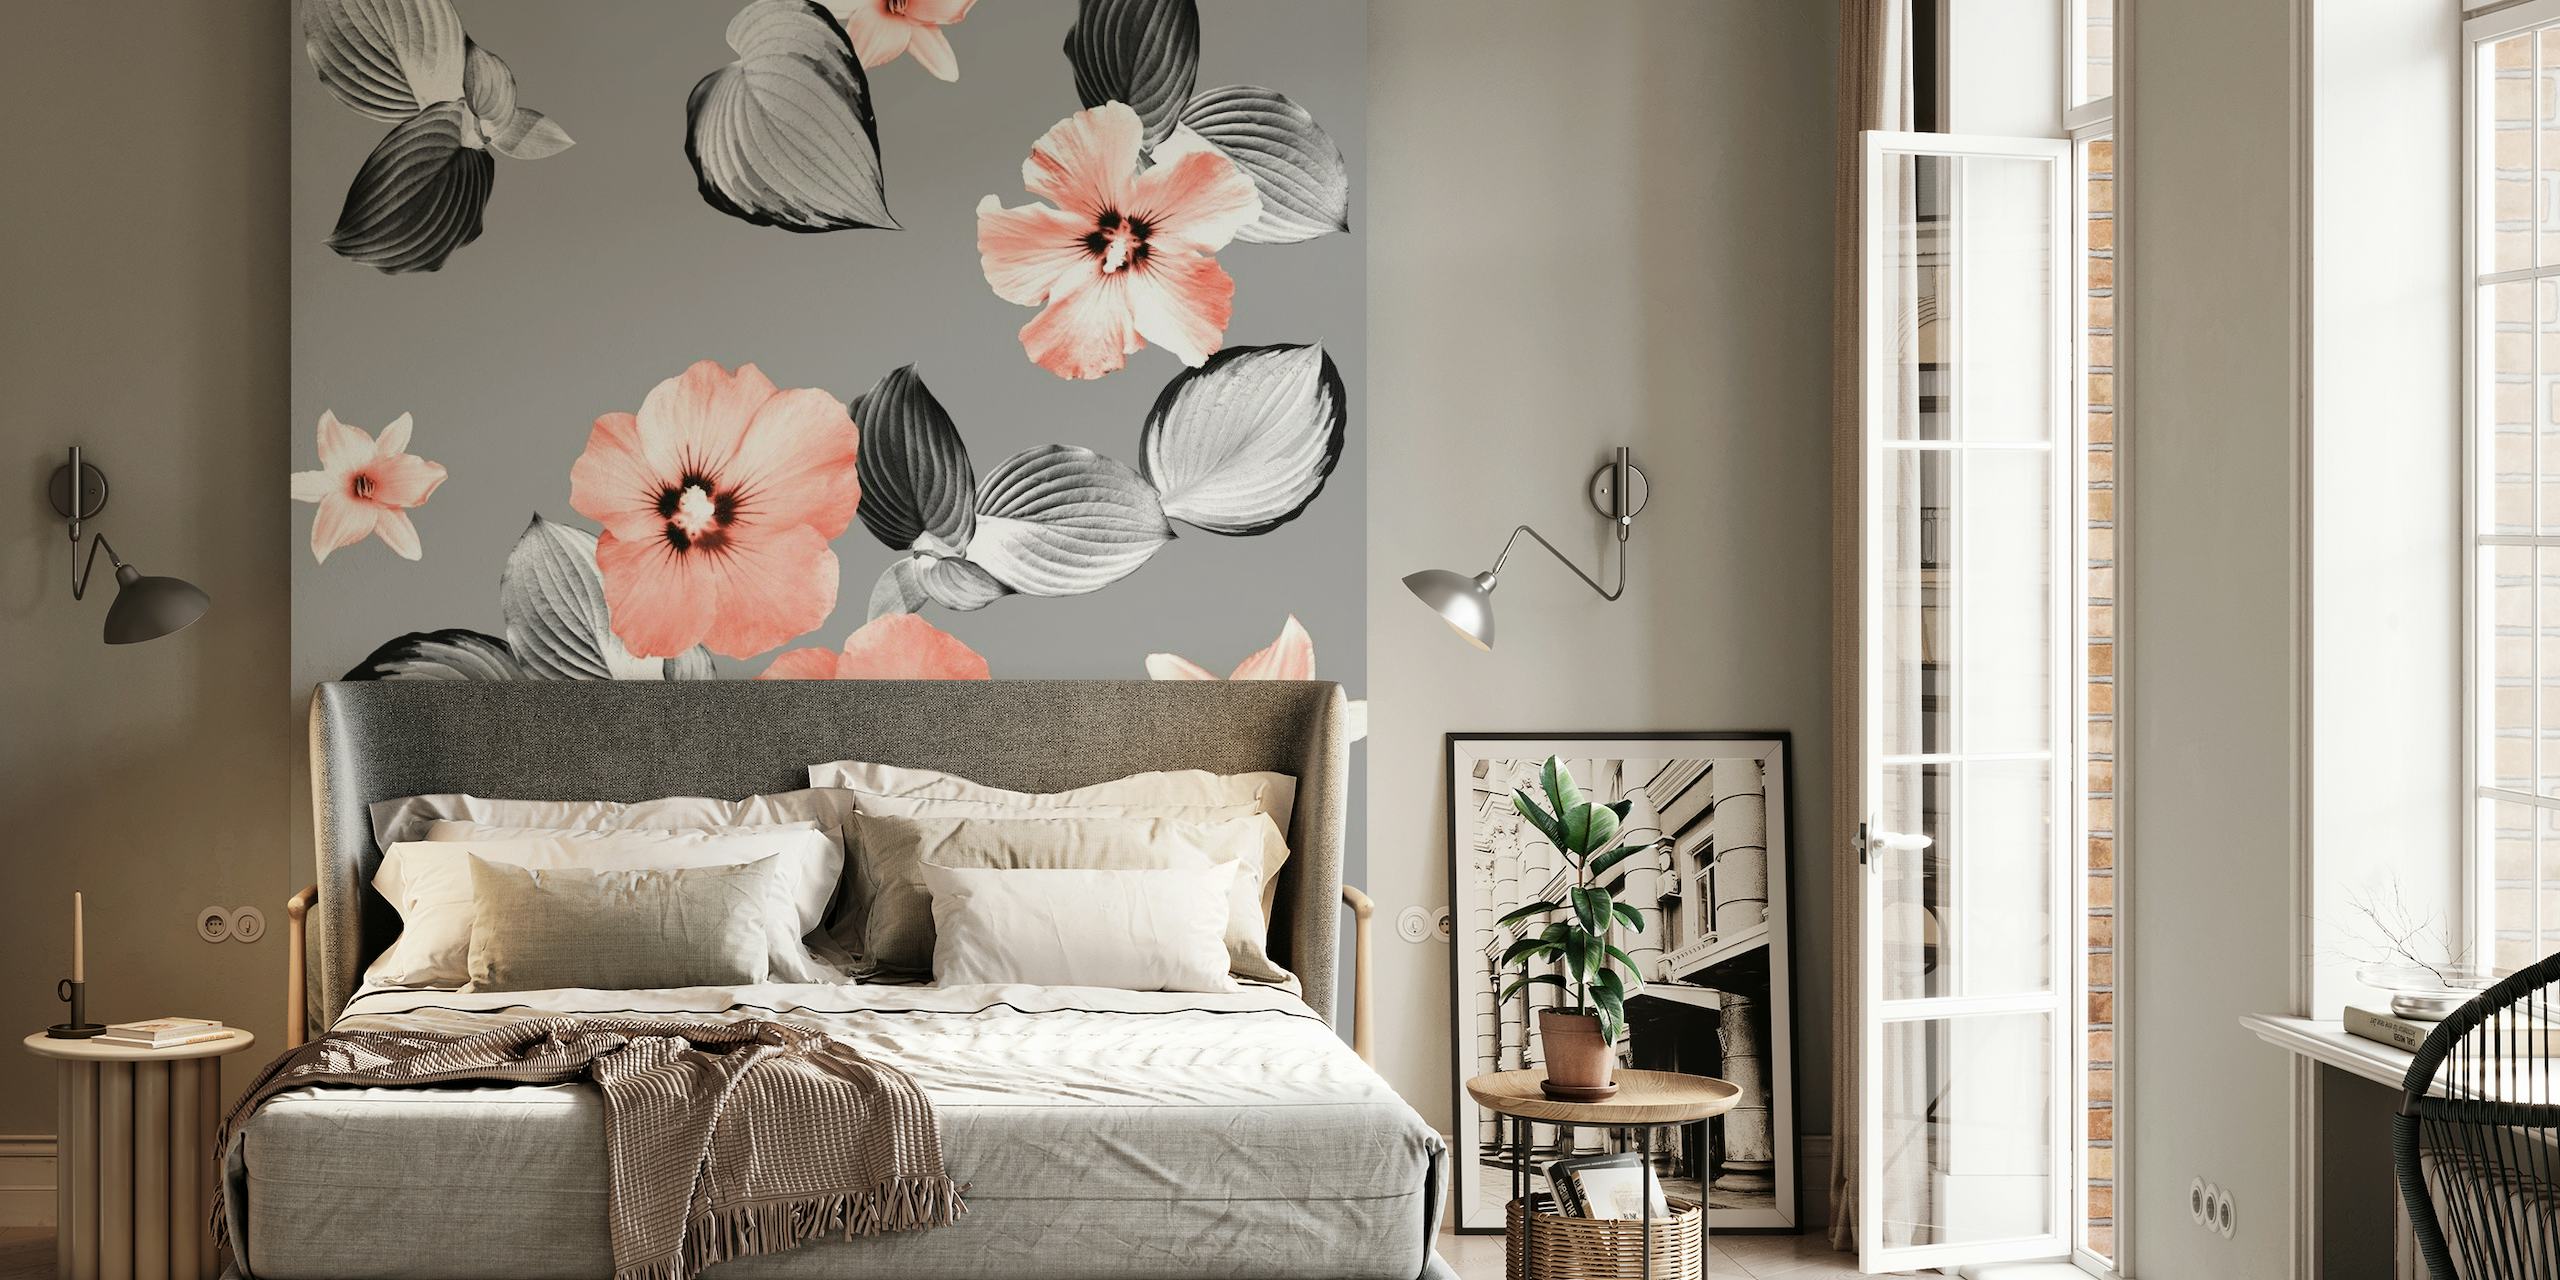 Living Coral flowers with monochrome leaves wall mural